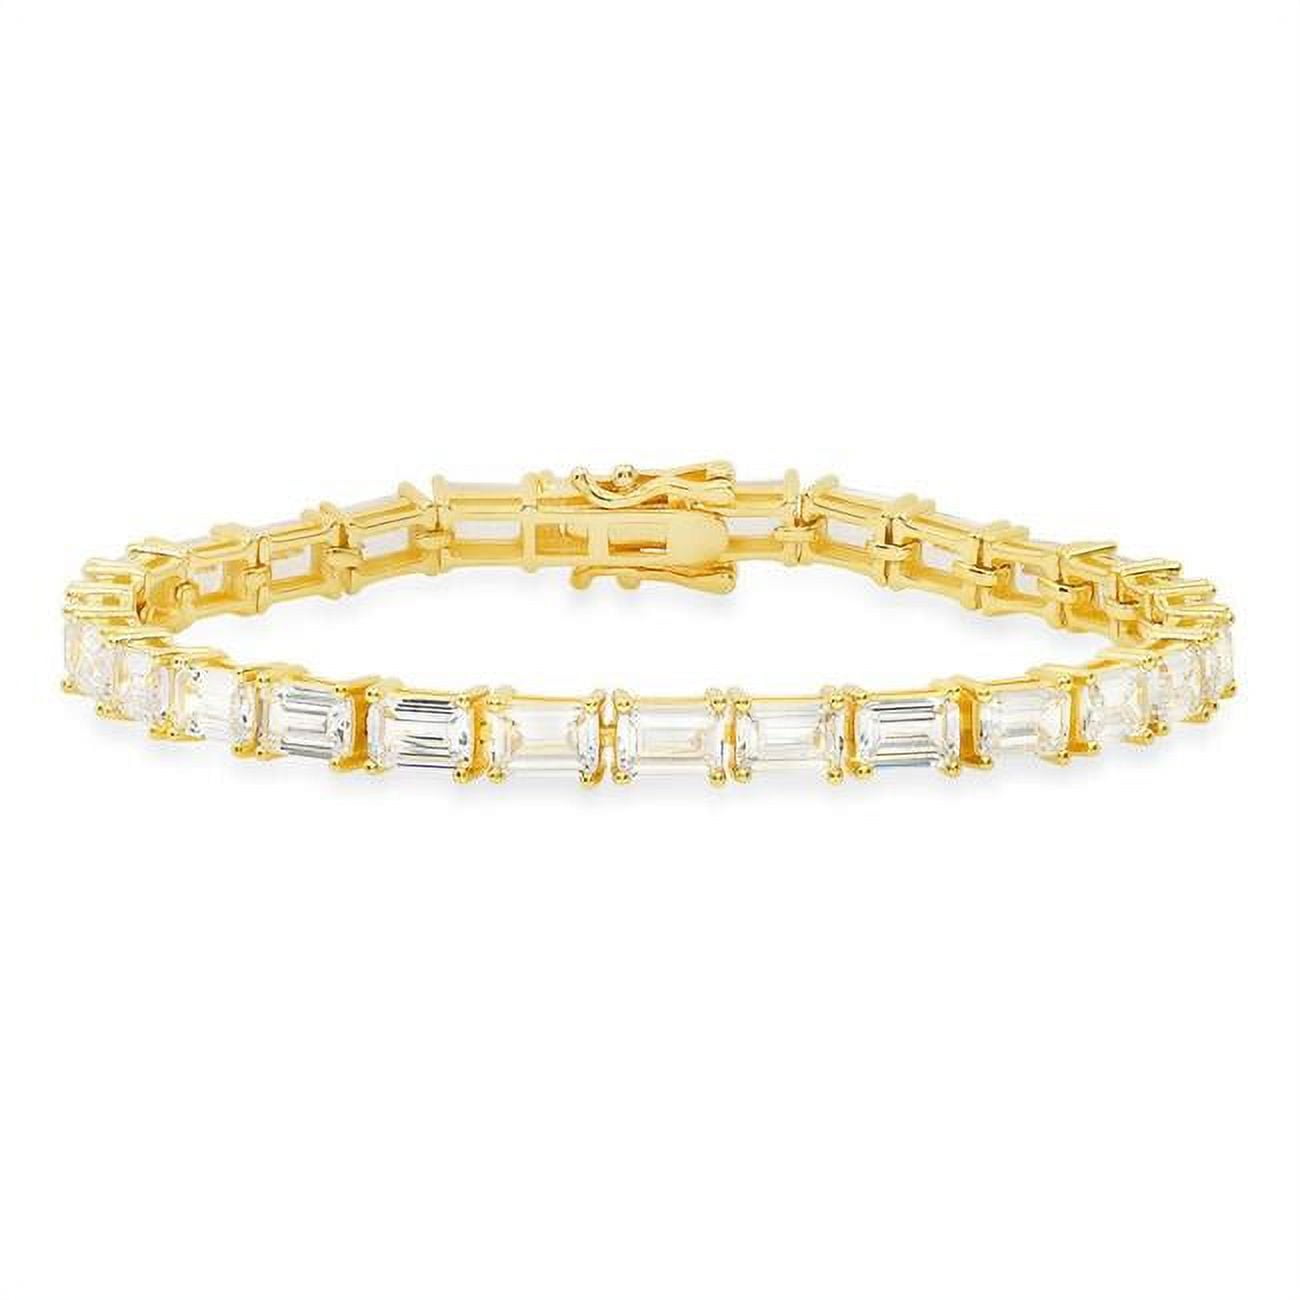 Picture of 212 Main 04-063Y-DSB 7.25 in. 14K Gold Over Silver Emerald-Cut Cubic Zirconia Tennis Bracelet